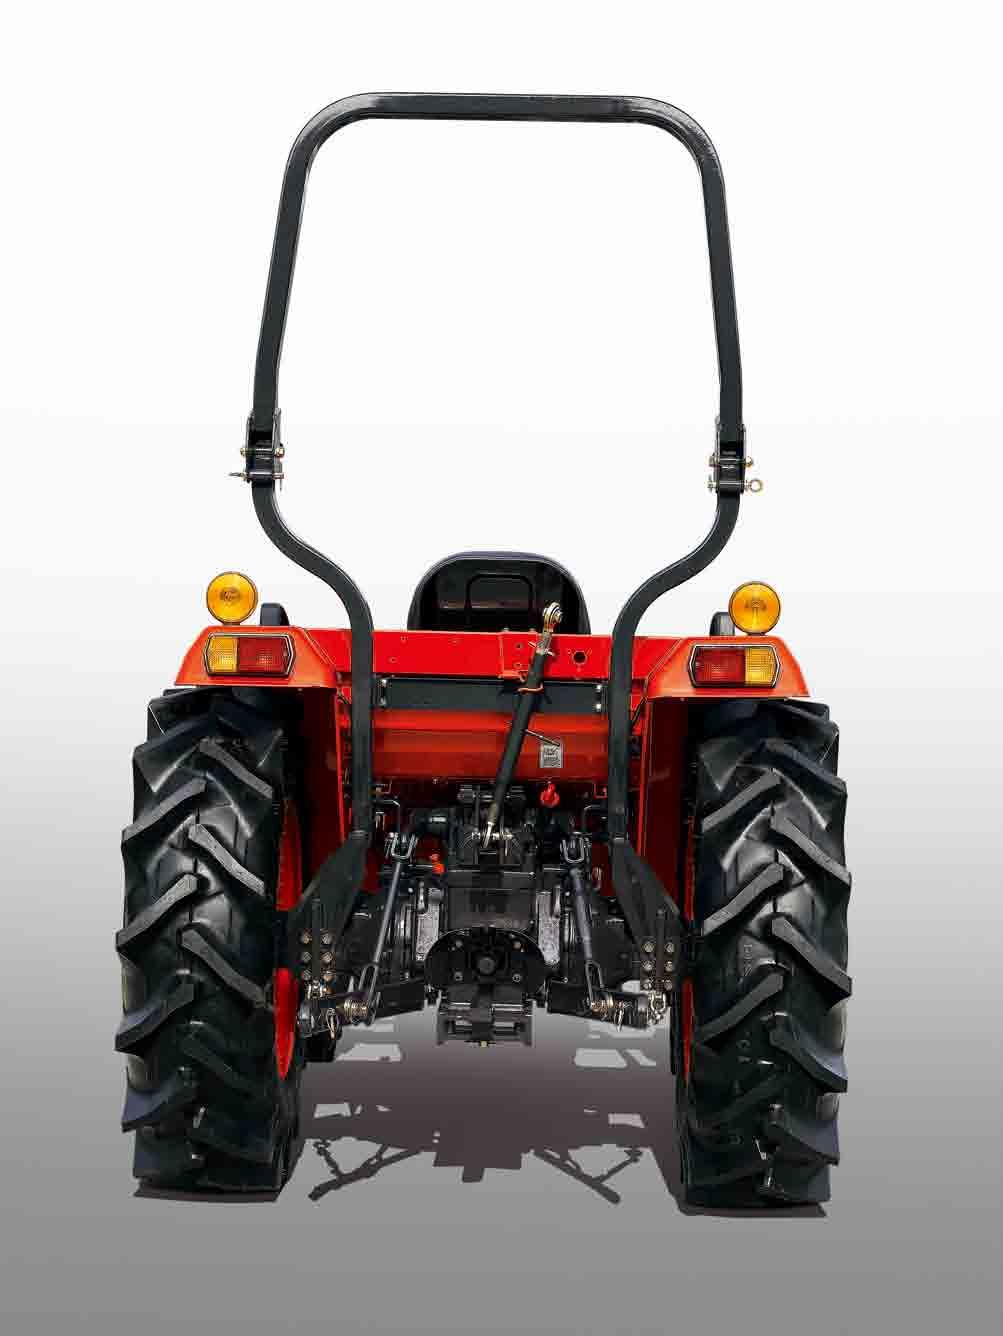 KIOTI Value tractor DS4110 / DS4510 Independent PTO The electro-hydraulic PTO clutch allows you to turn the PTO ON and OFF with just a simple flip of a switch.